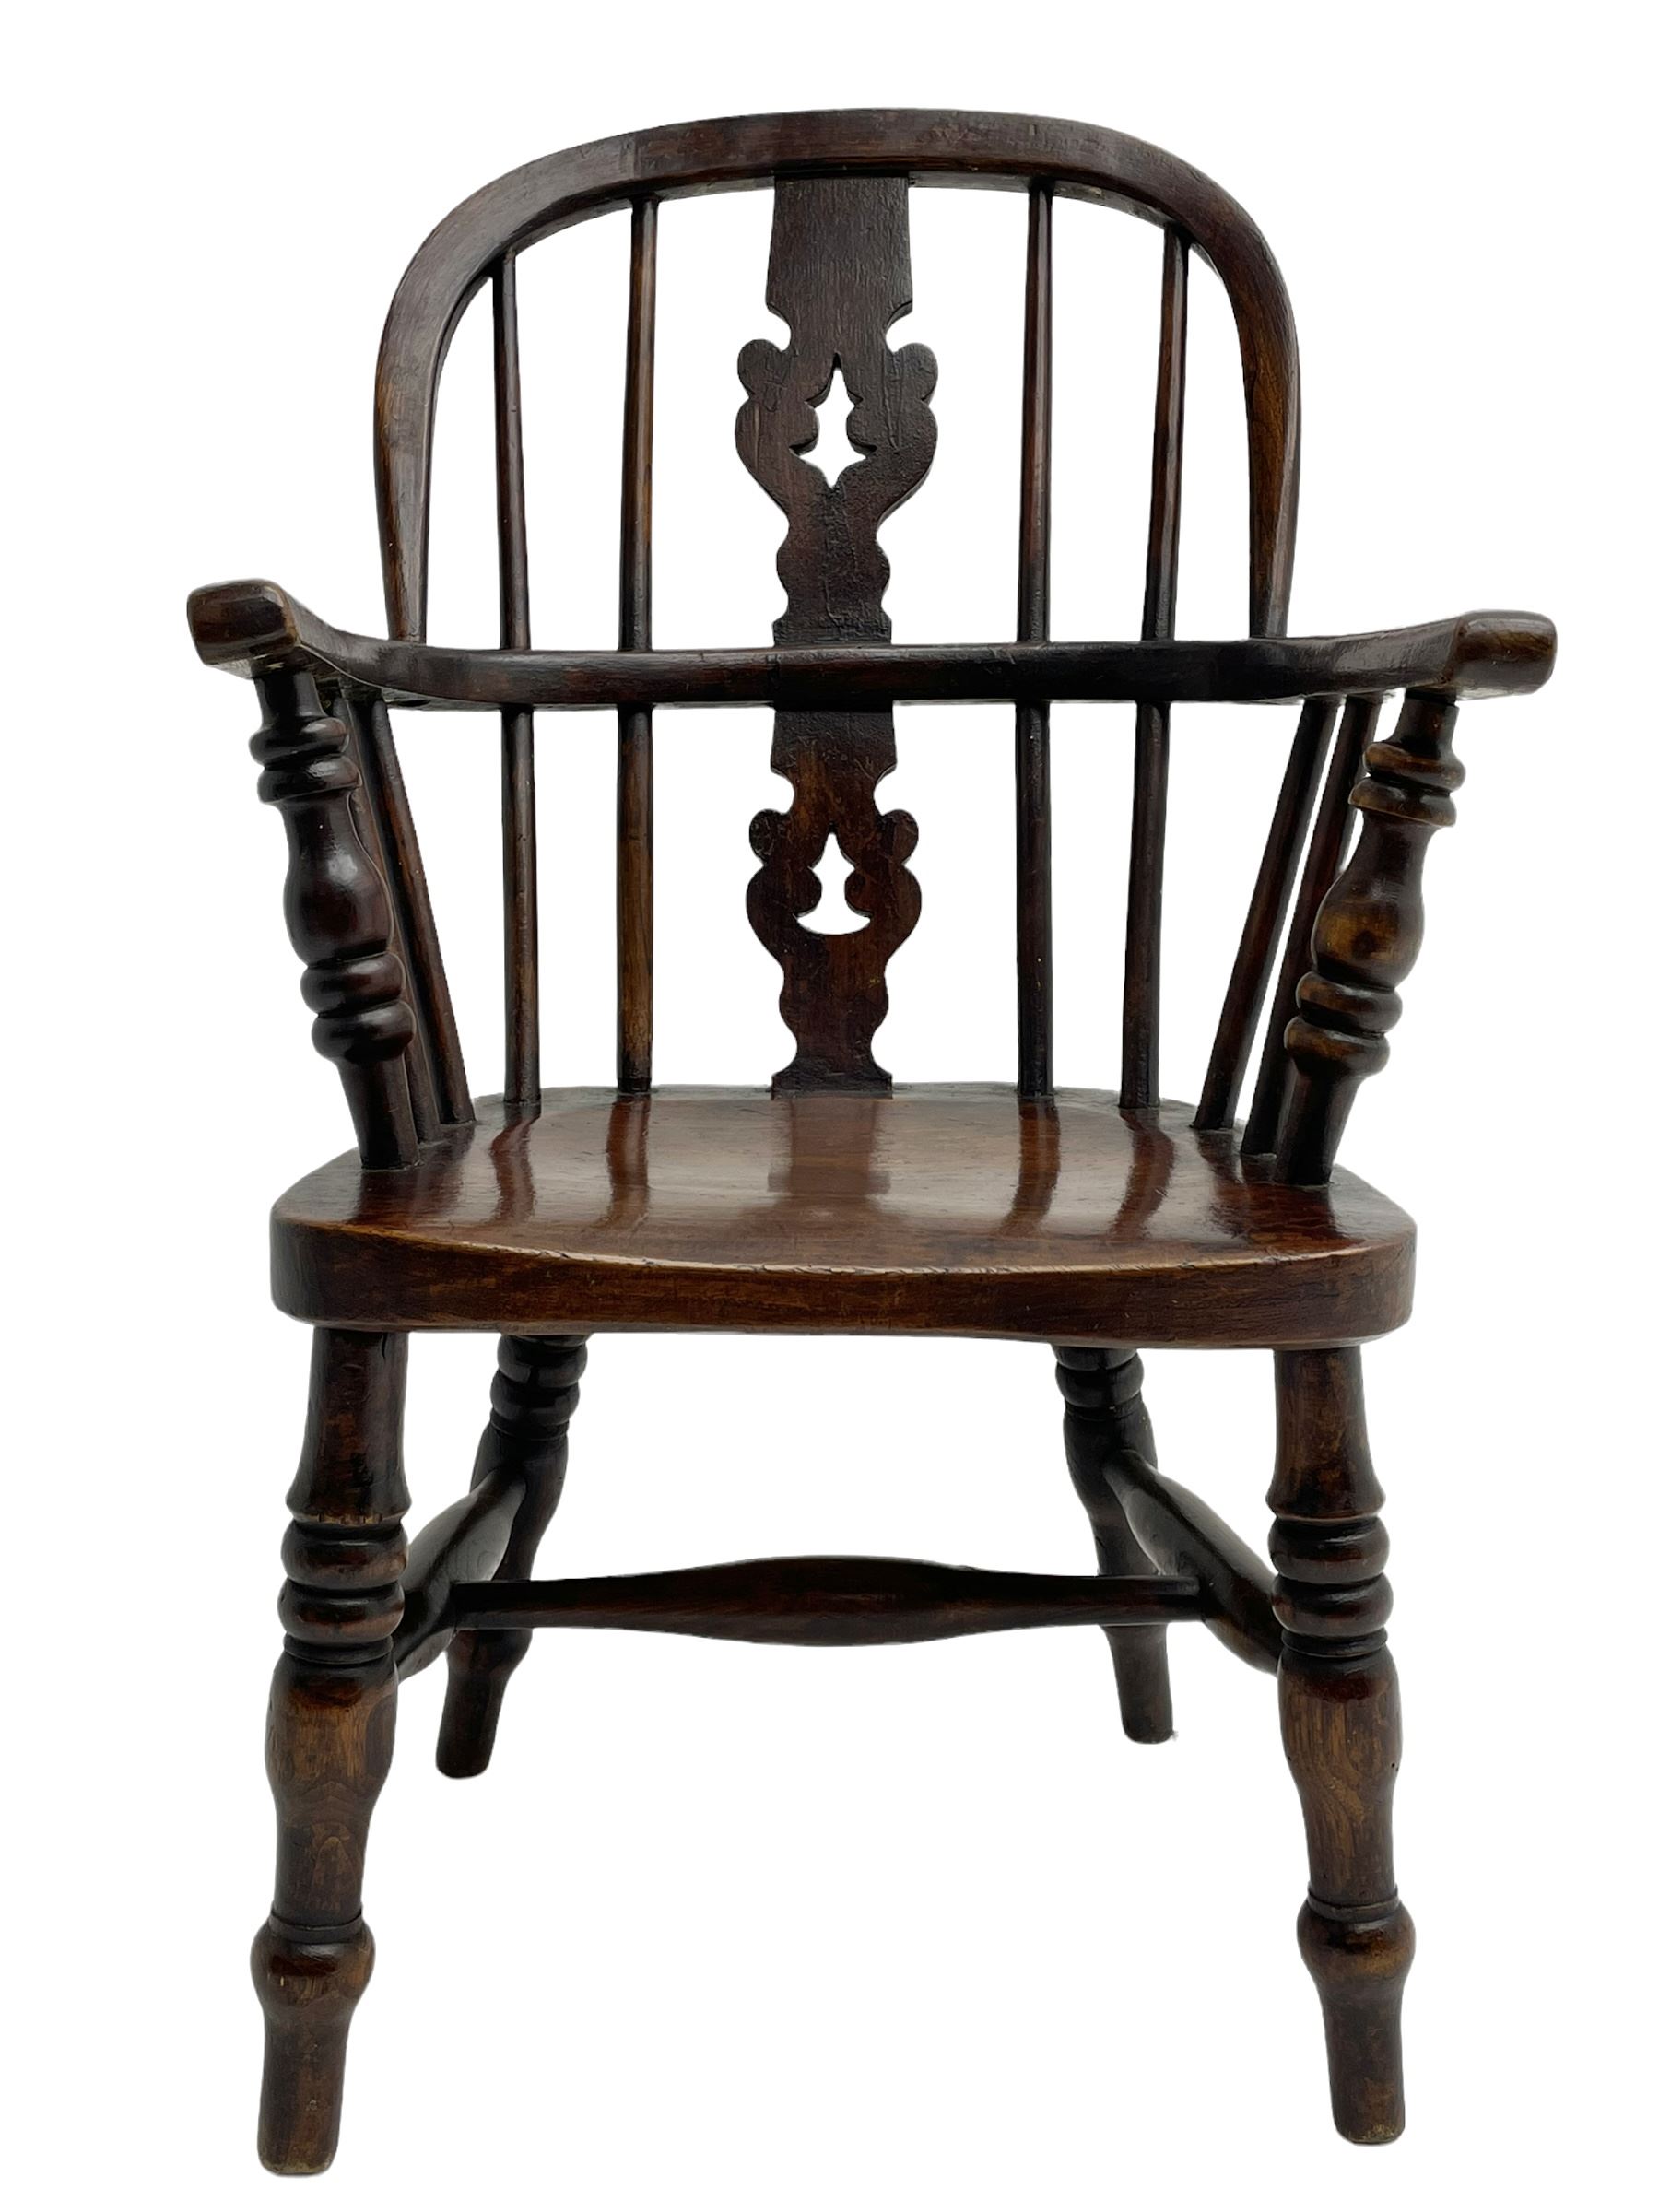 Early 19th century ash and elm child's Windsor armchair